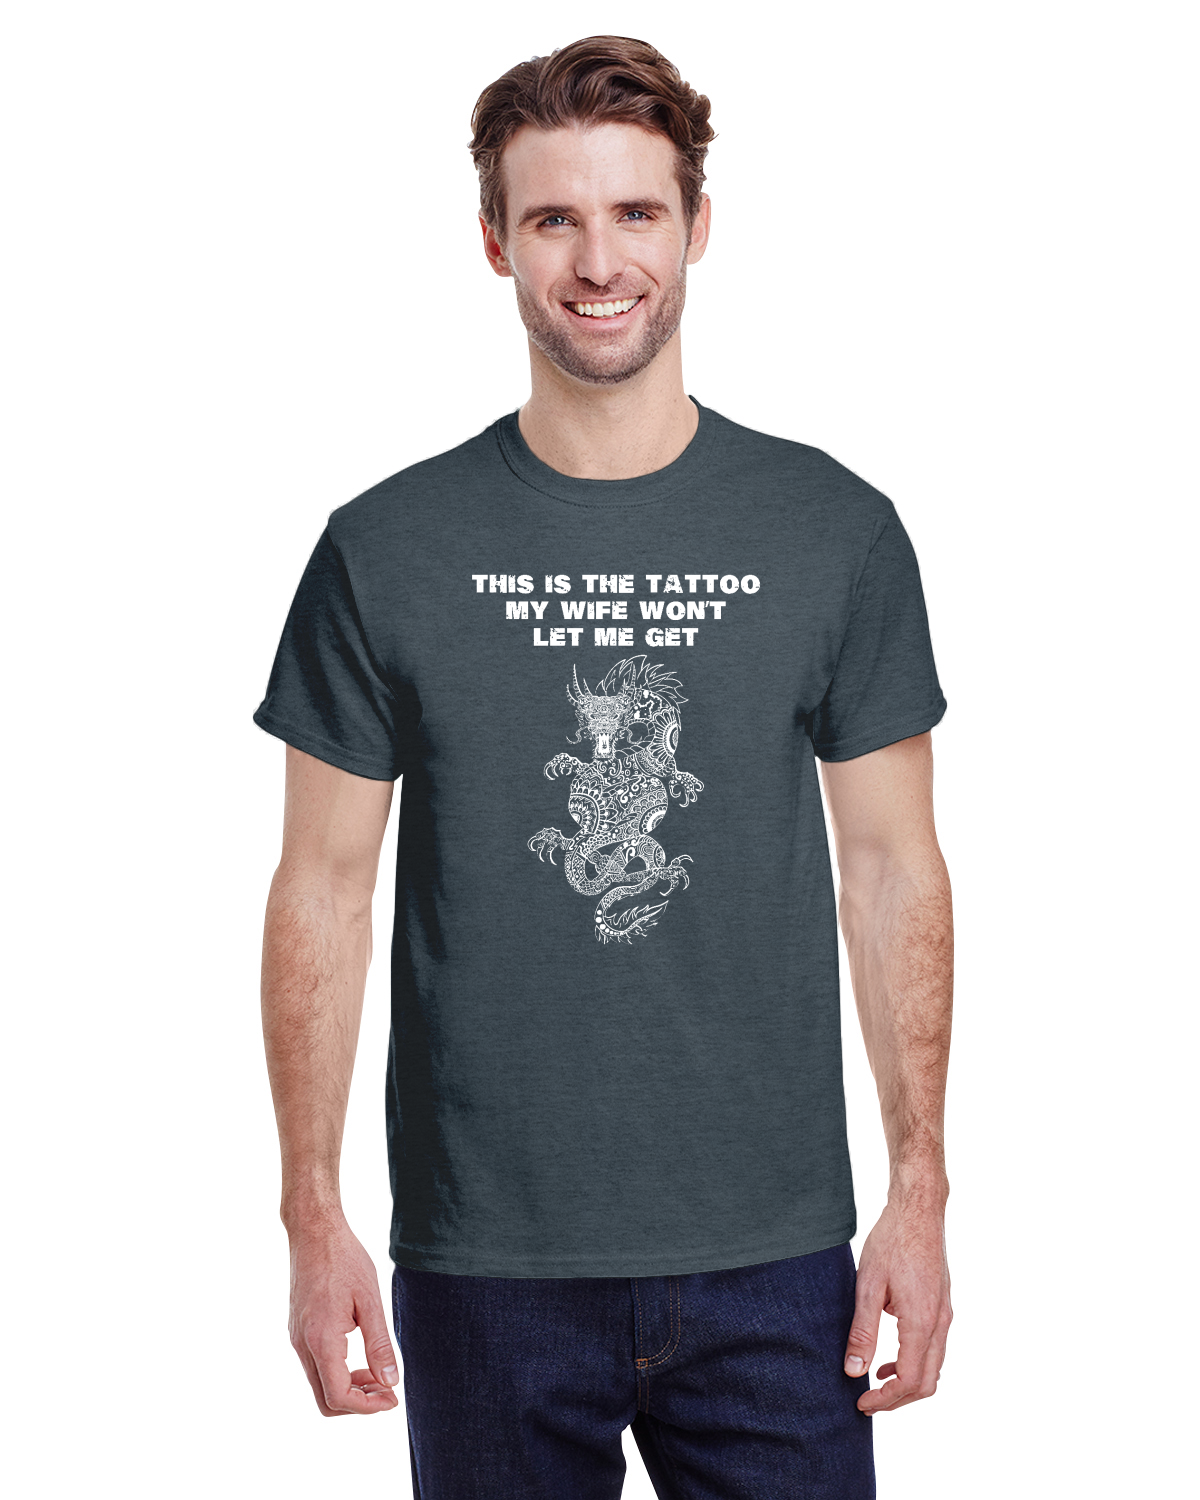 Dragon Tattoo Shirt: This is the Tattoo My Wife Won't Let Me Get - Funny Tee for Tattoo Lovers